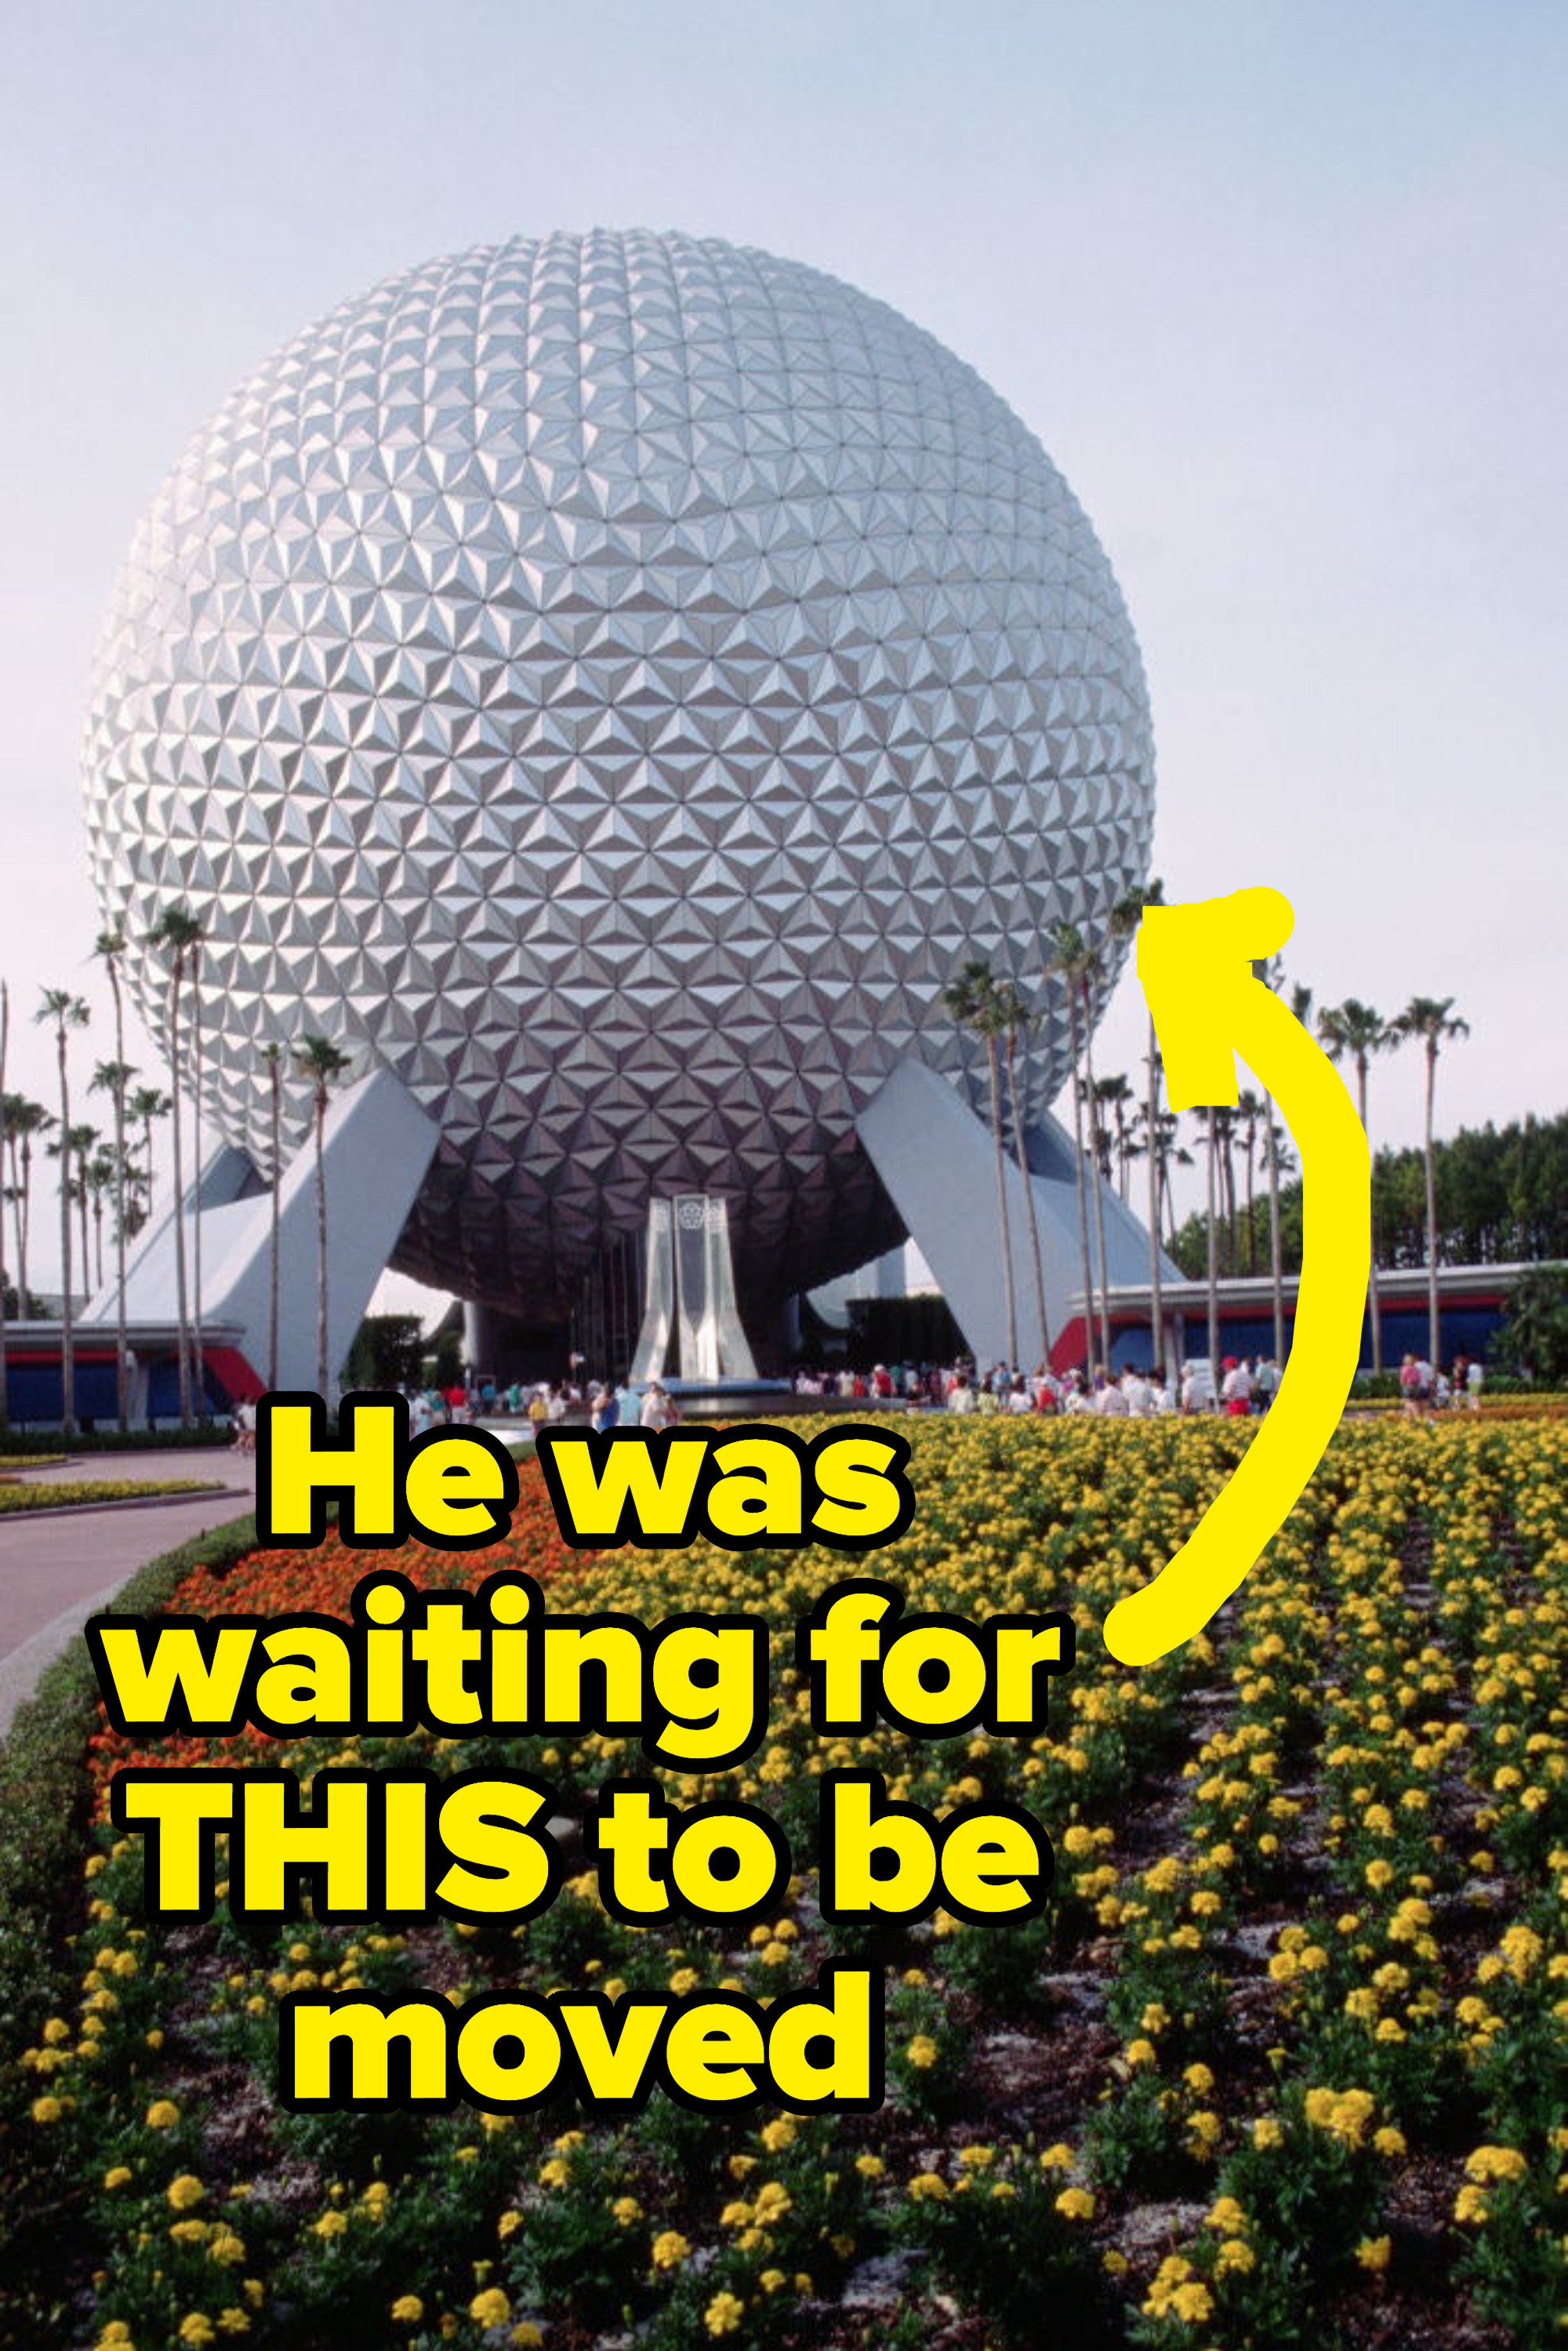 arrow pointing to the large golf ball sculpture that was supposed to be moved